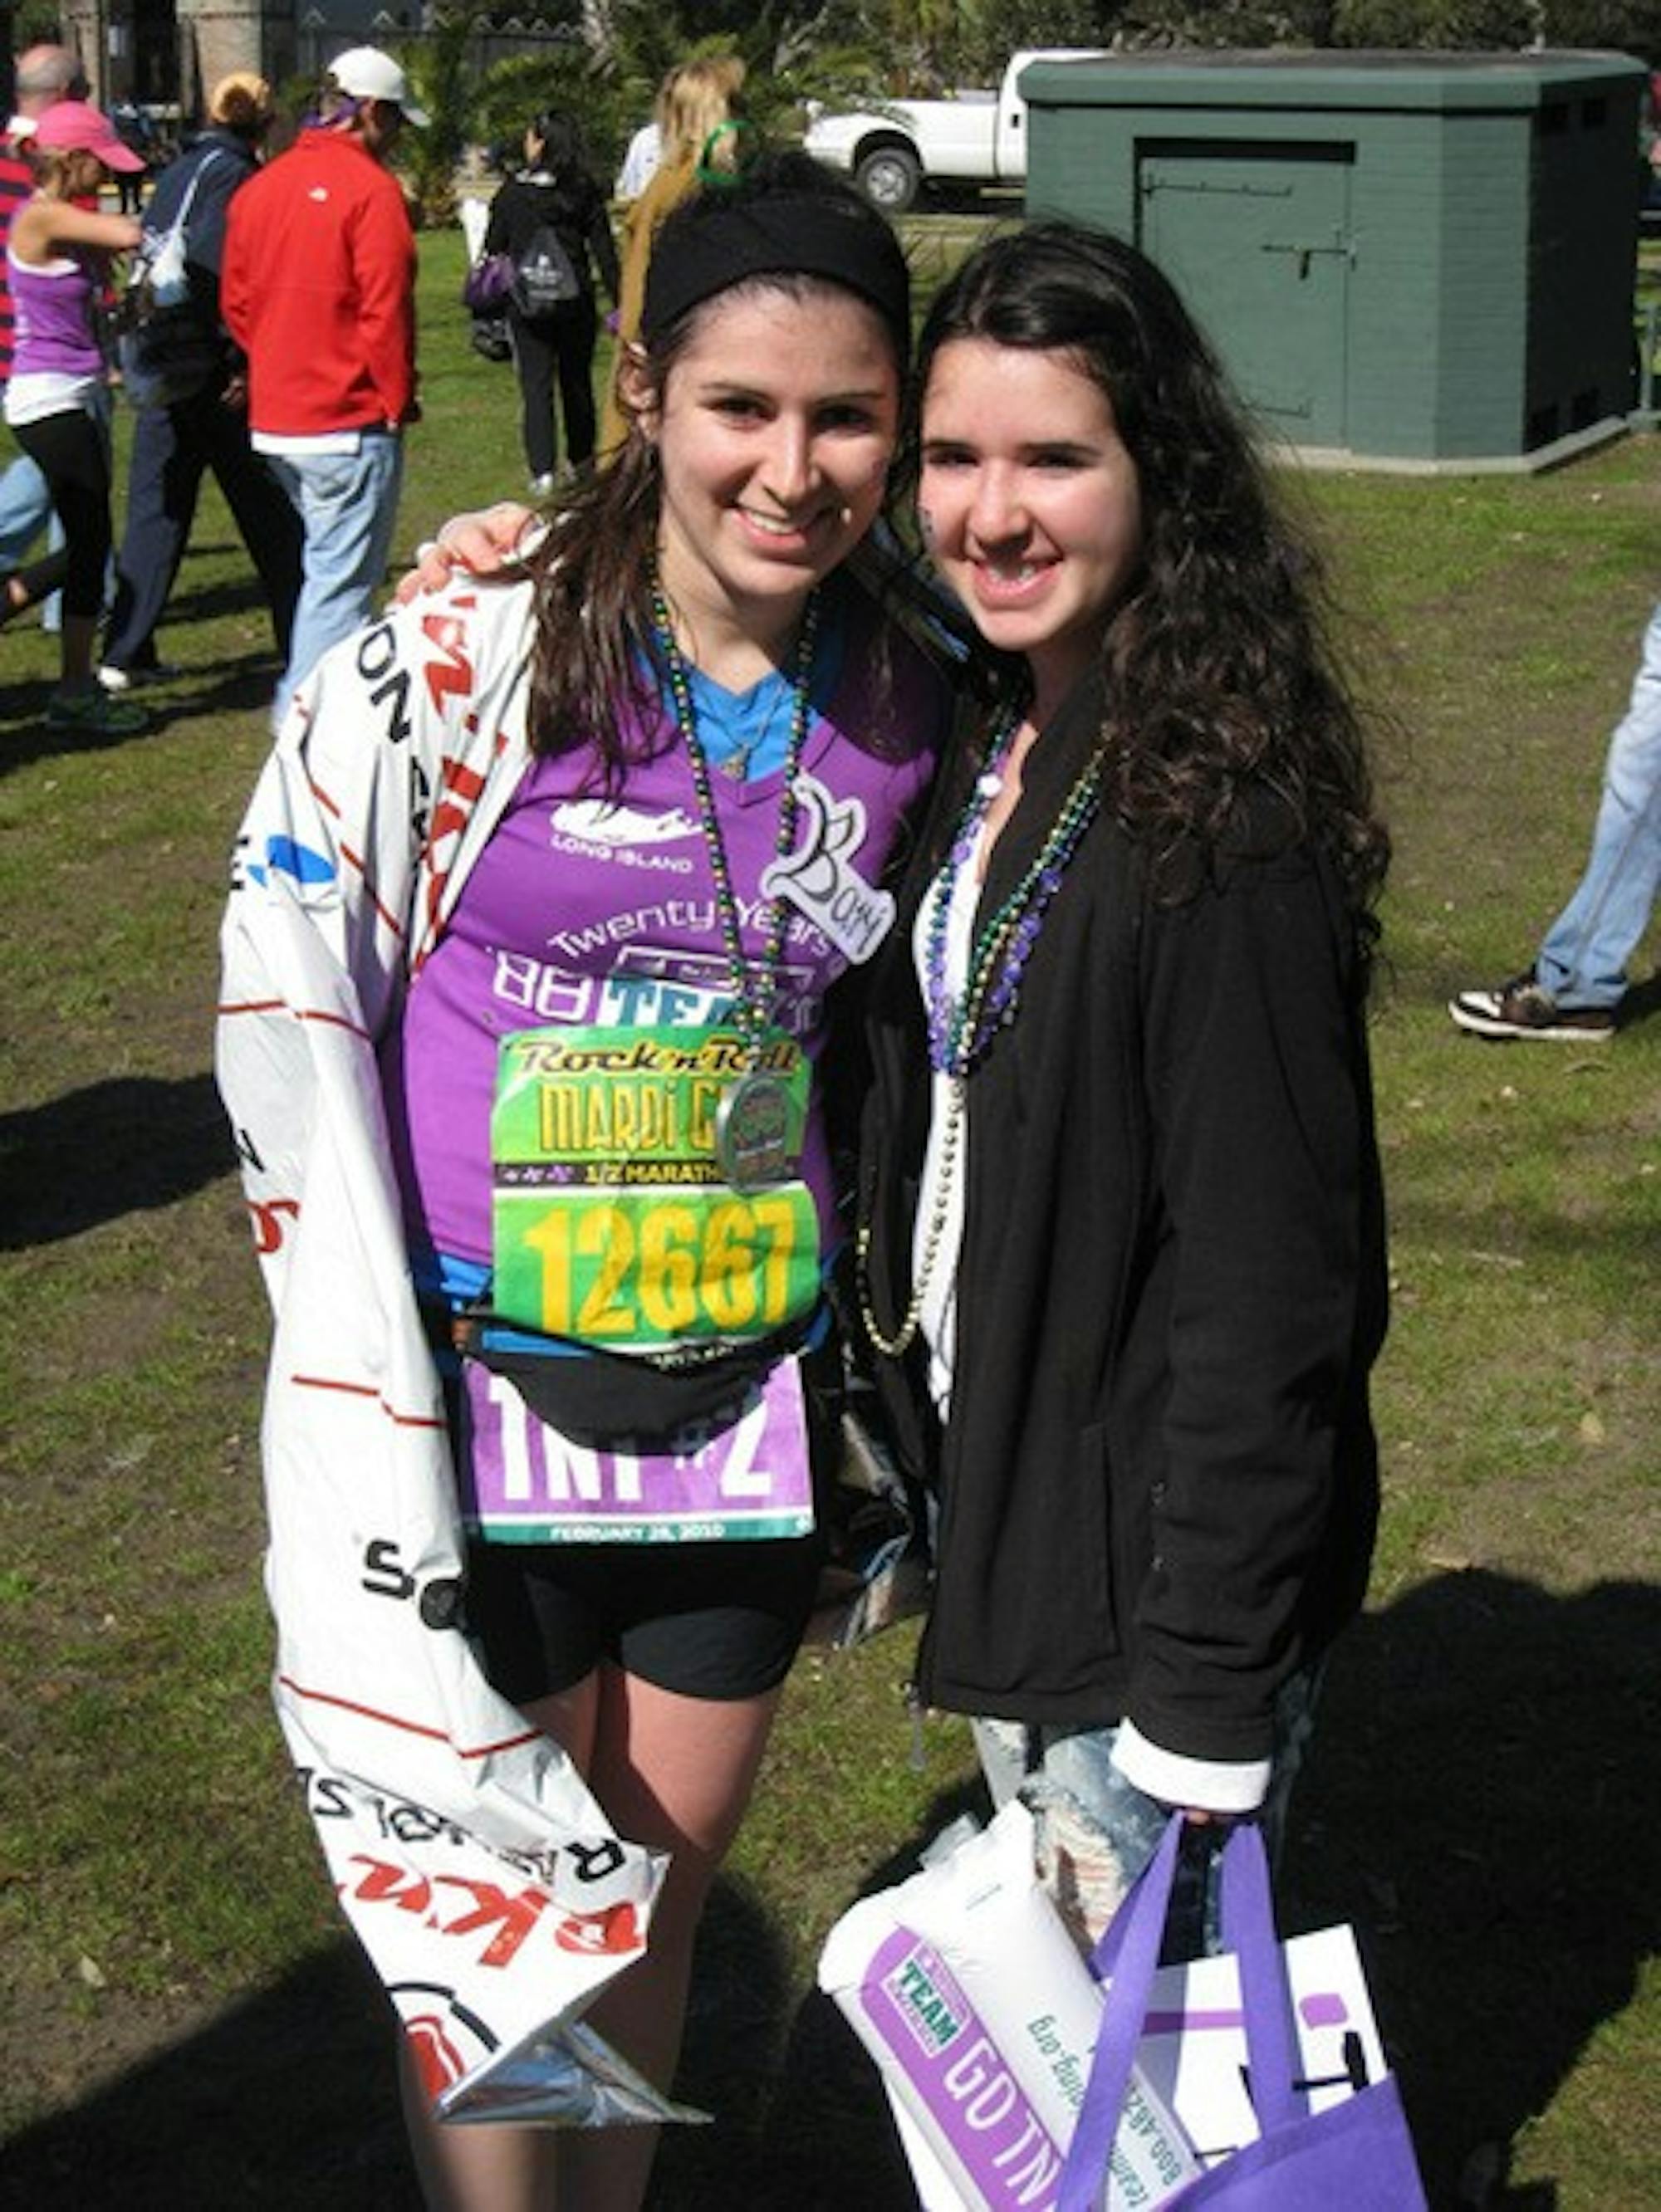 Bari Wien '10, left, ran a half-marathon to raise funds for blood cancer research and patient programs in the name of her younger sister Kasey, right.